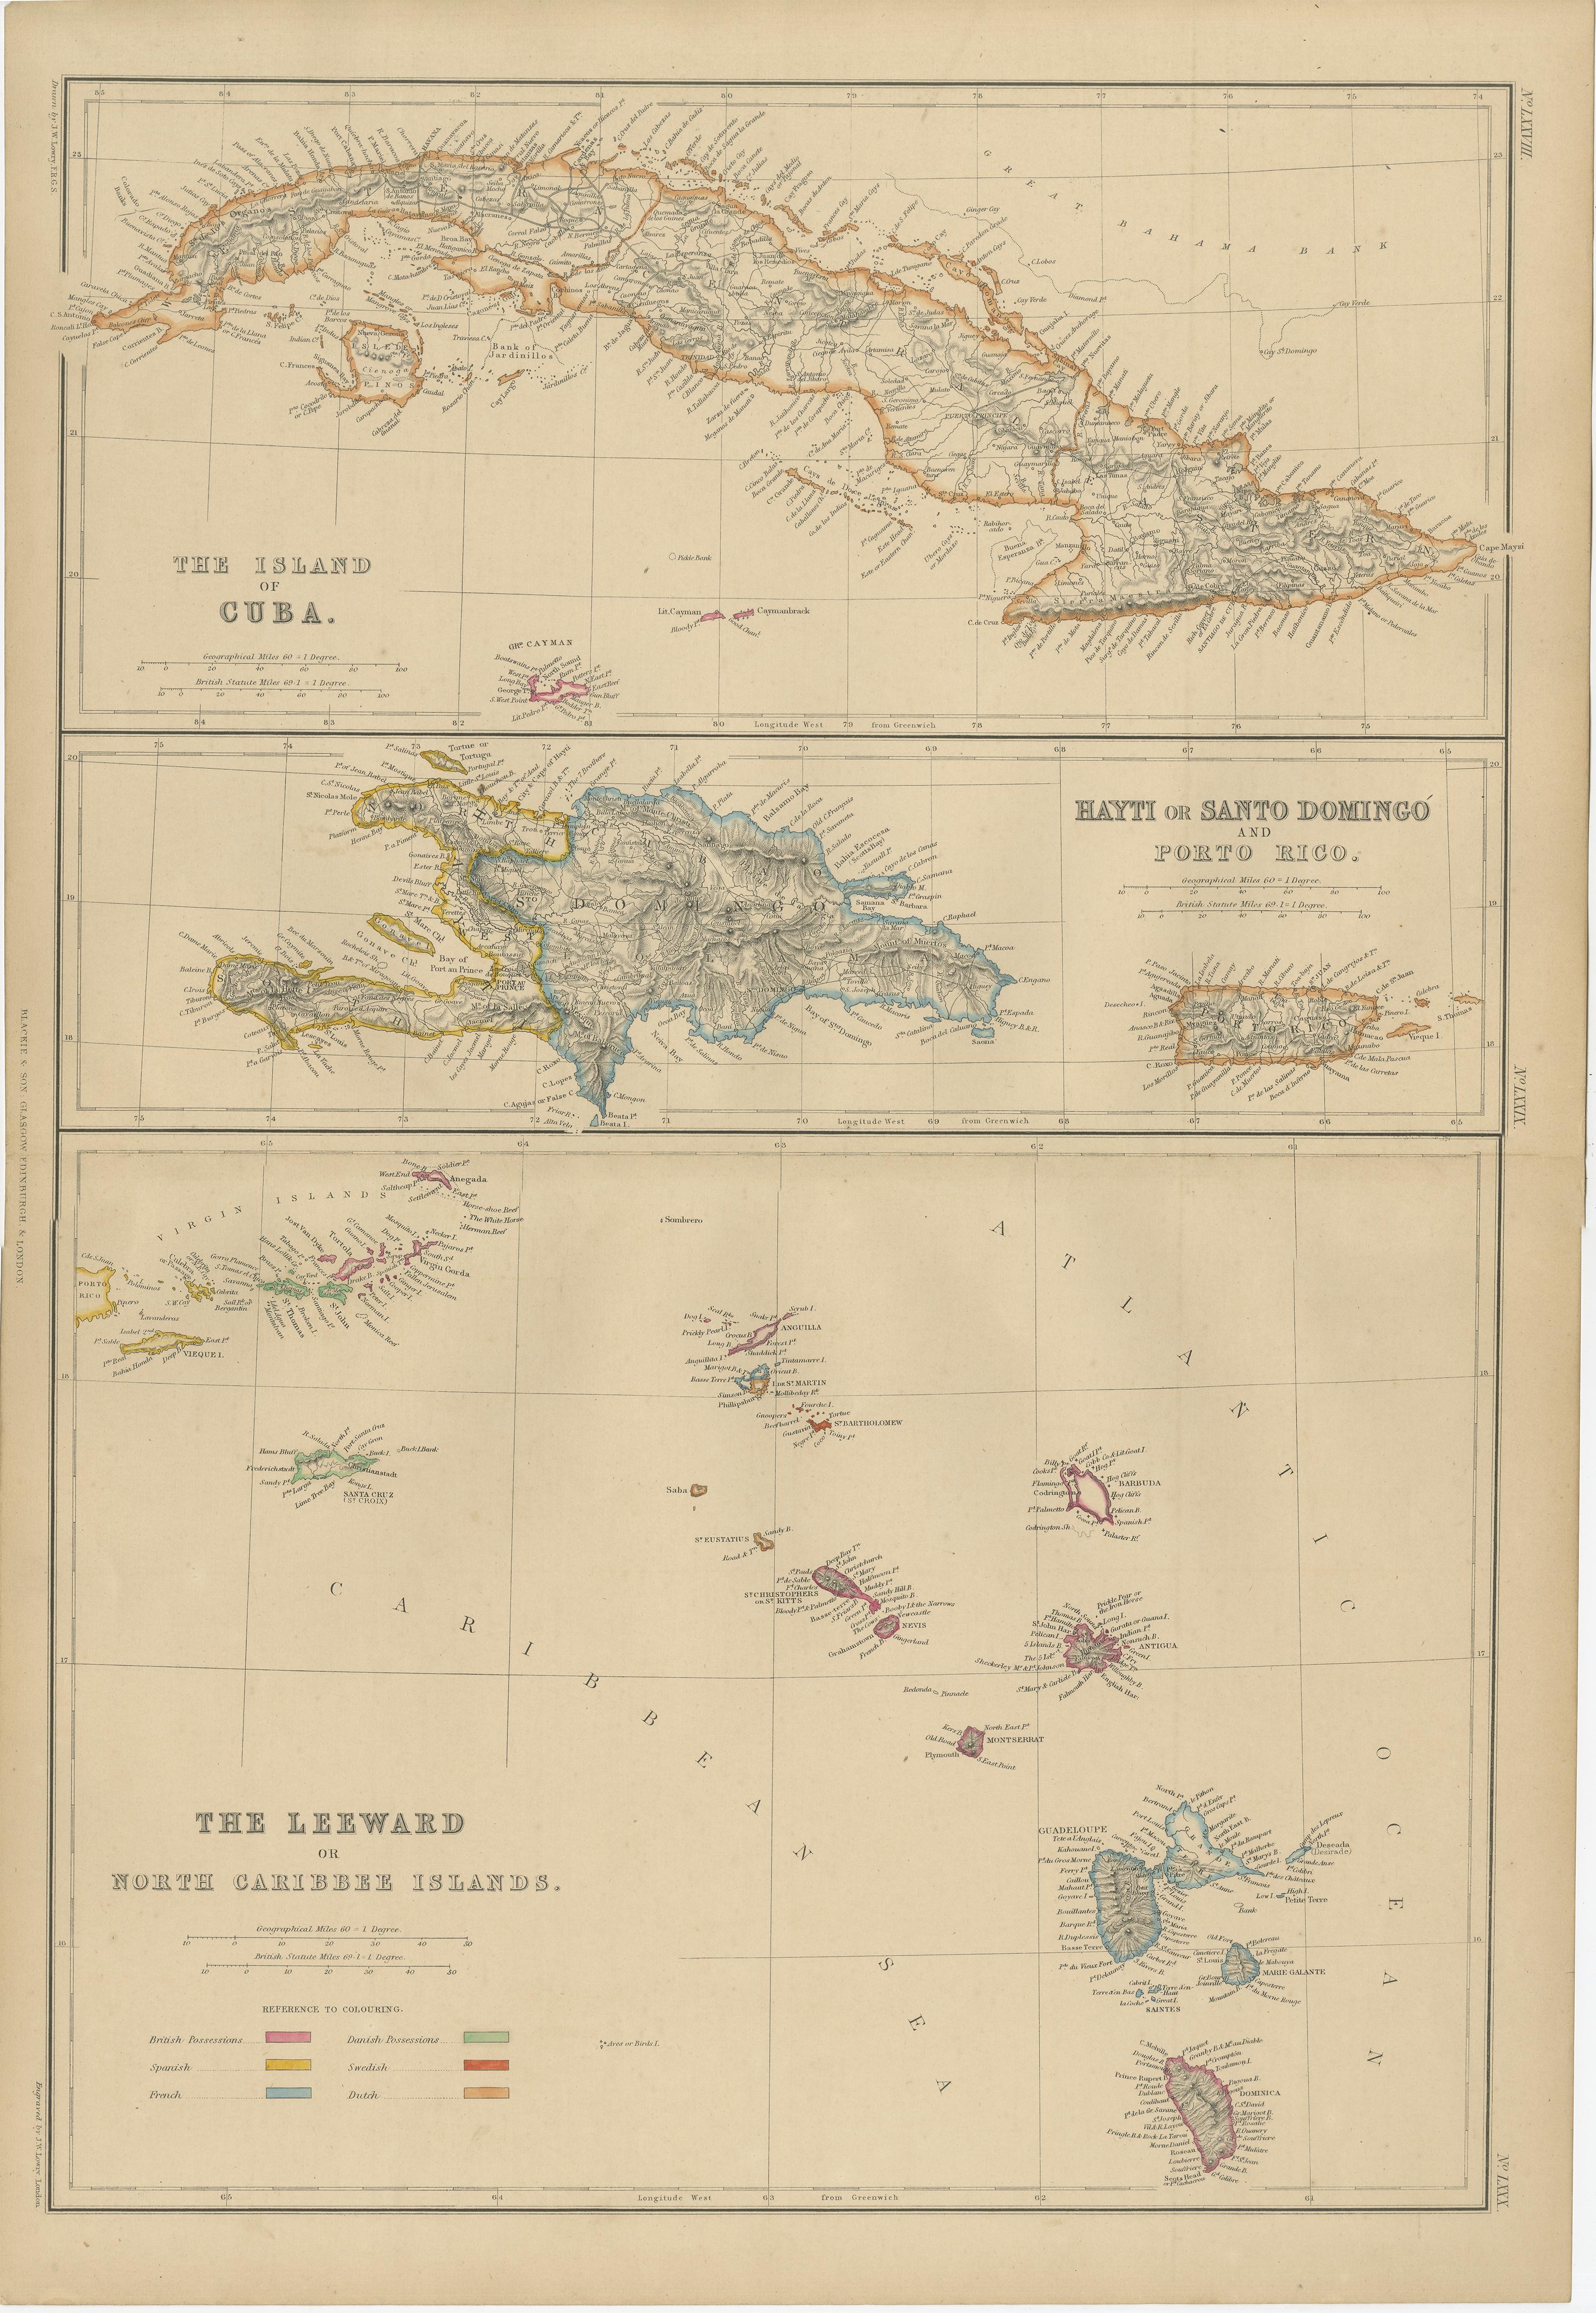 Antique map titled 'The Leeward or North Caribbean Islands'. Original antique map of Cuba, Haiti and Porto Rico. This map originates from ‘The Imperial Atlas of Modern Geography’. Published by W. G. Blackie, 1859.